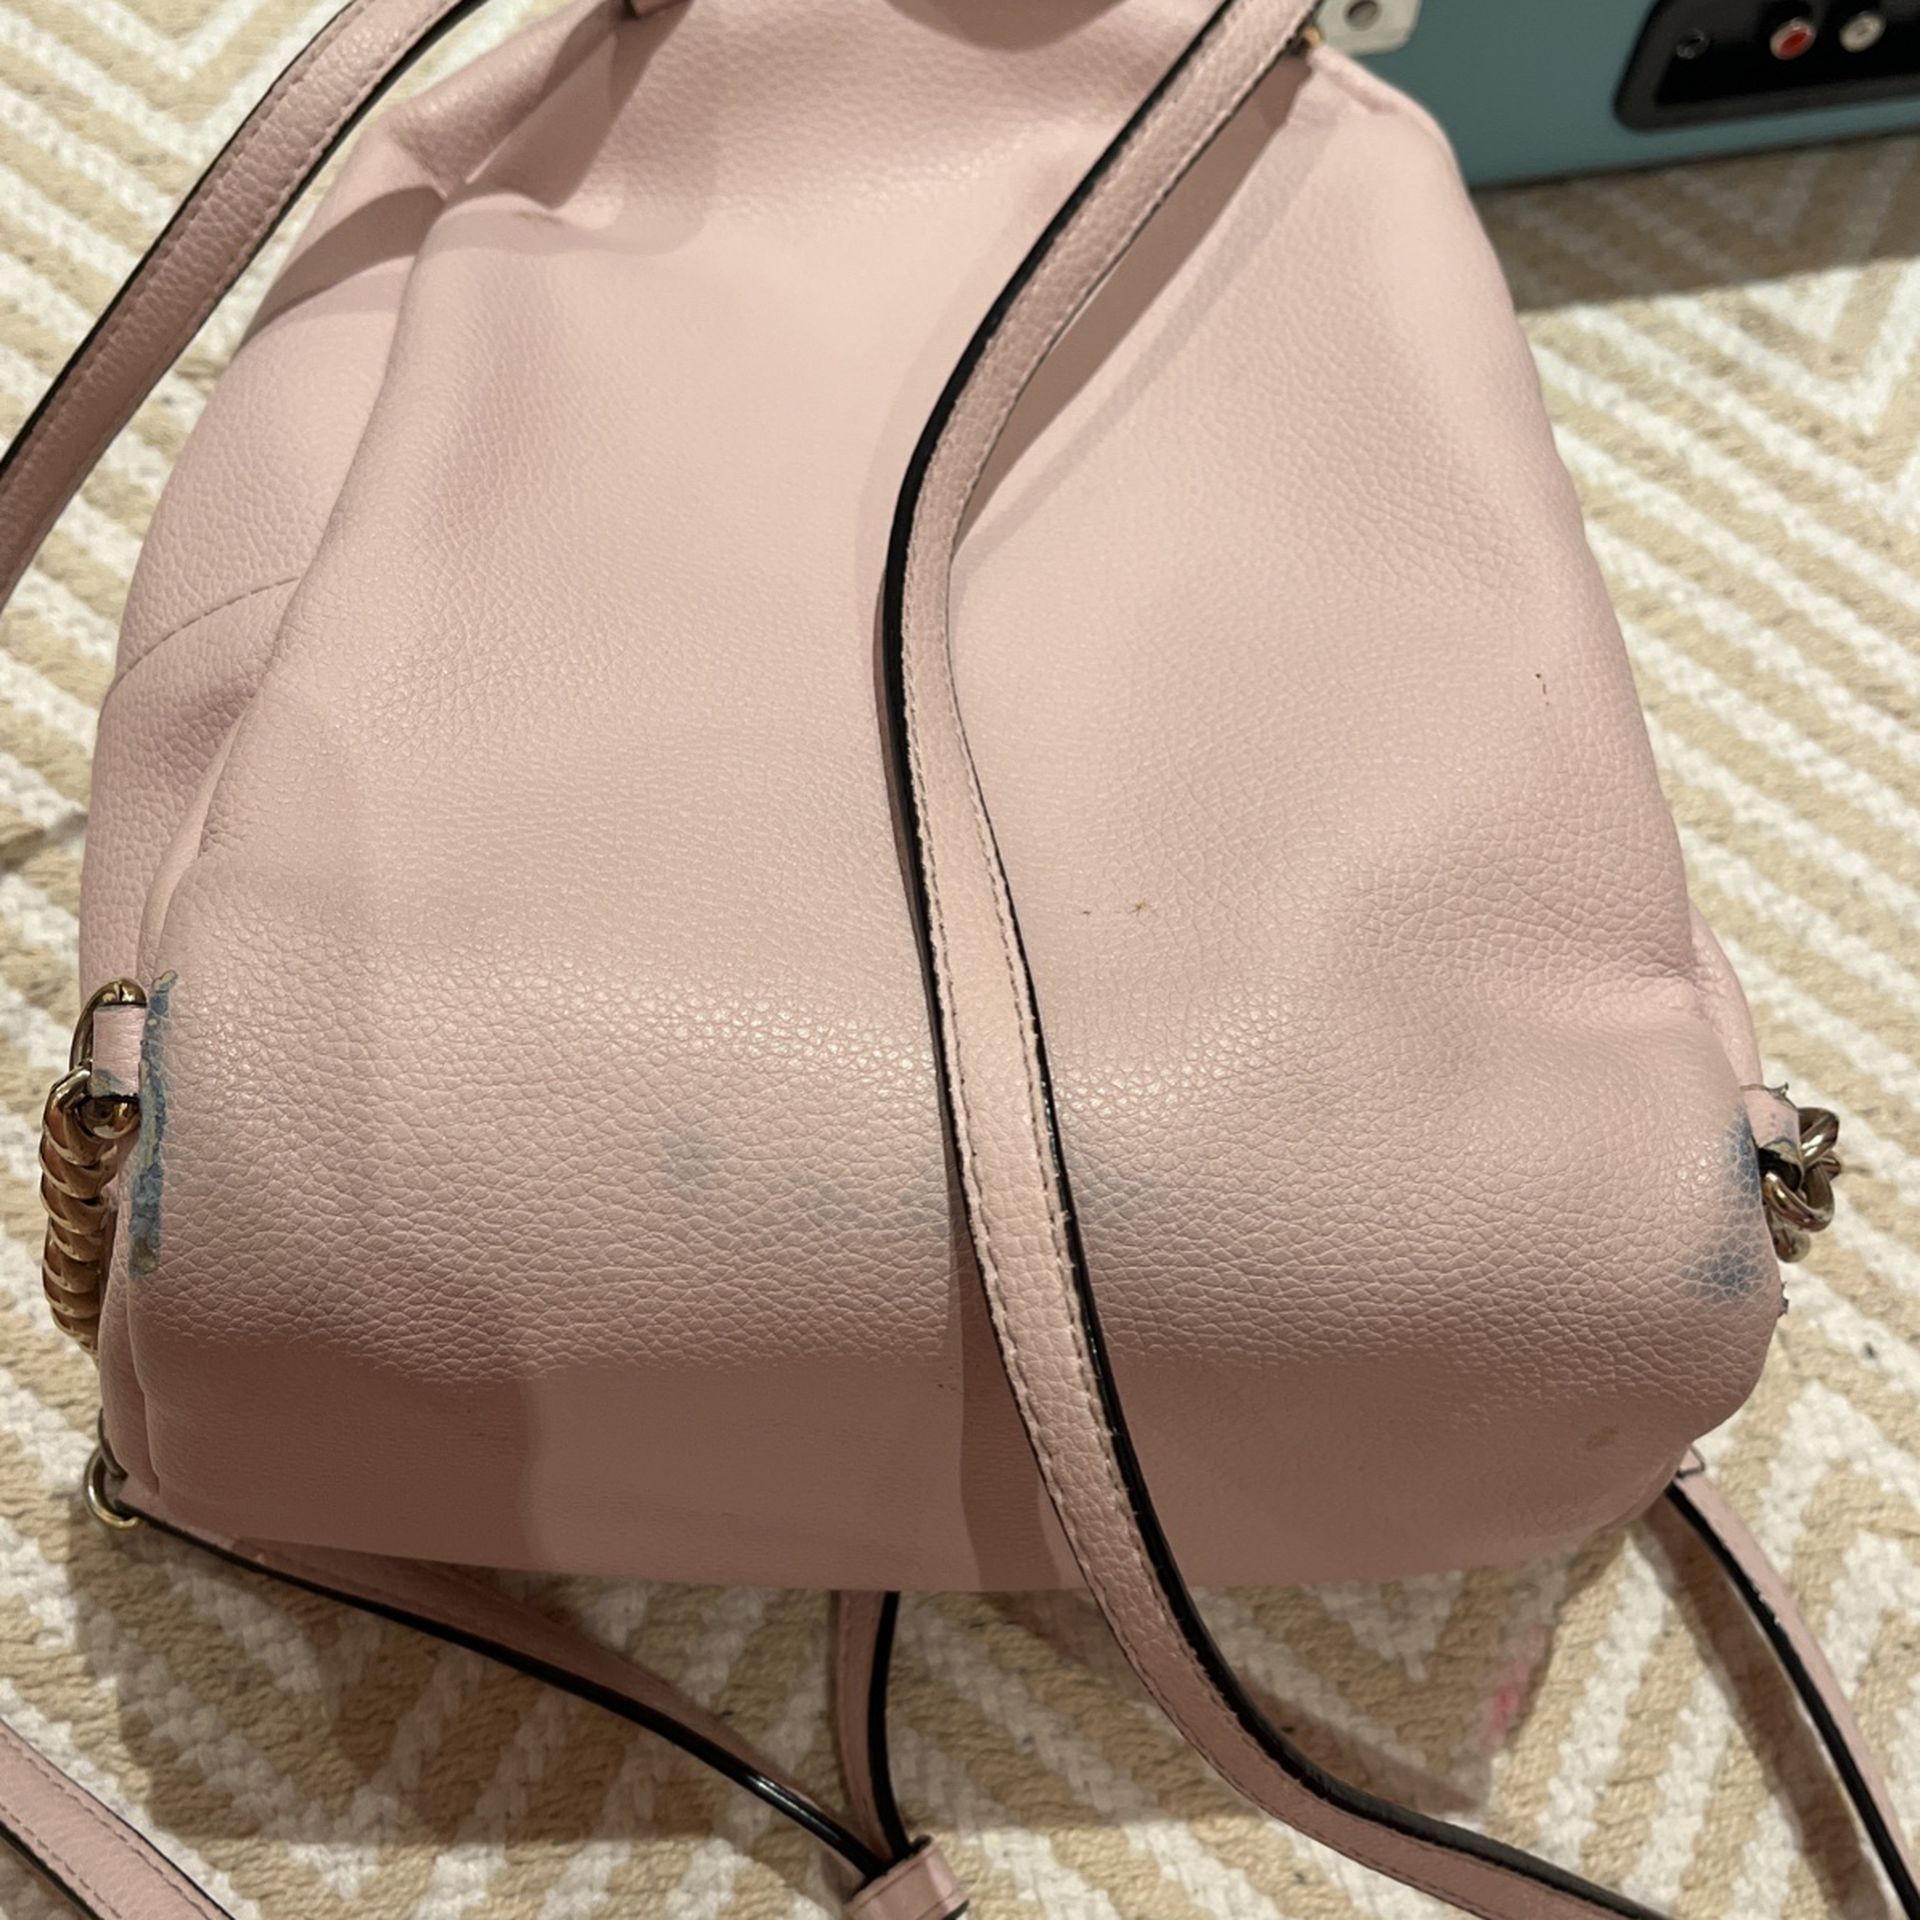 Victoria's Secret Mini Backpack for Sale in Shadow Hills, CA - OfferUp